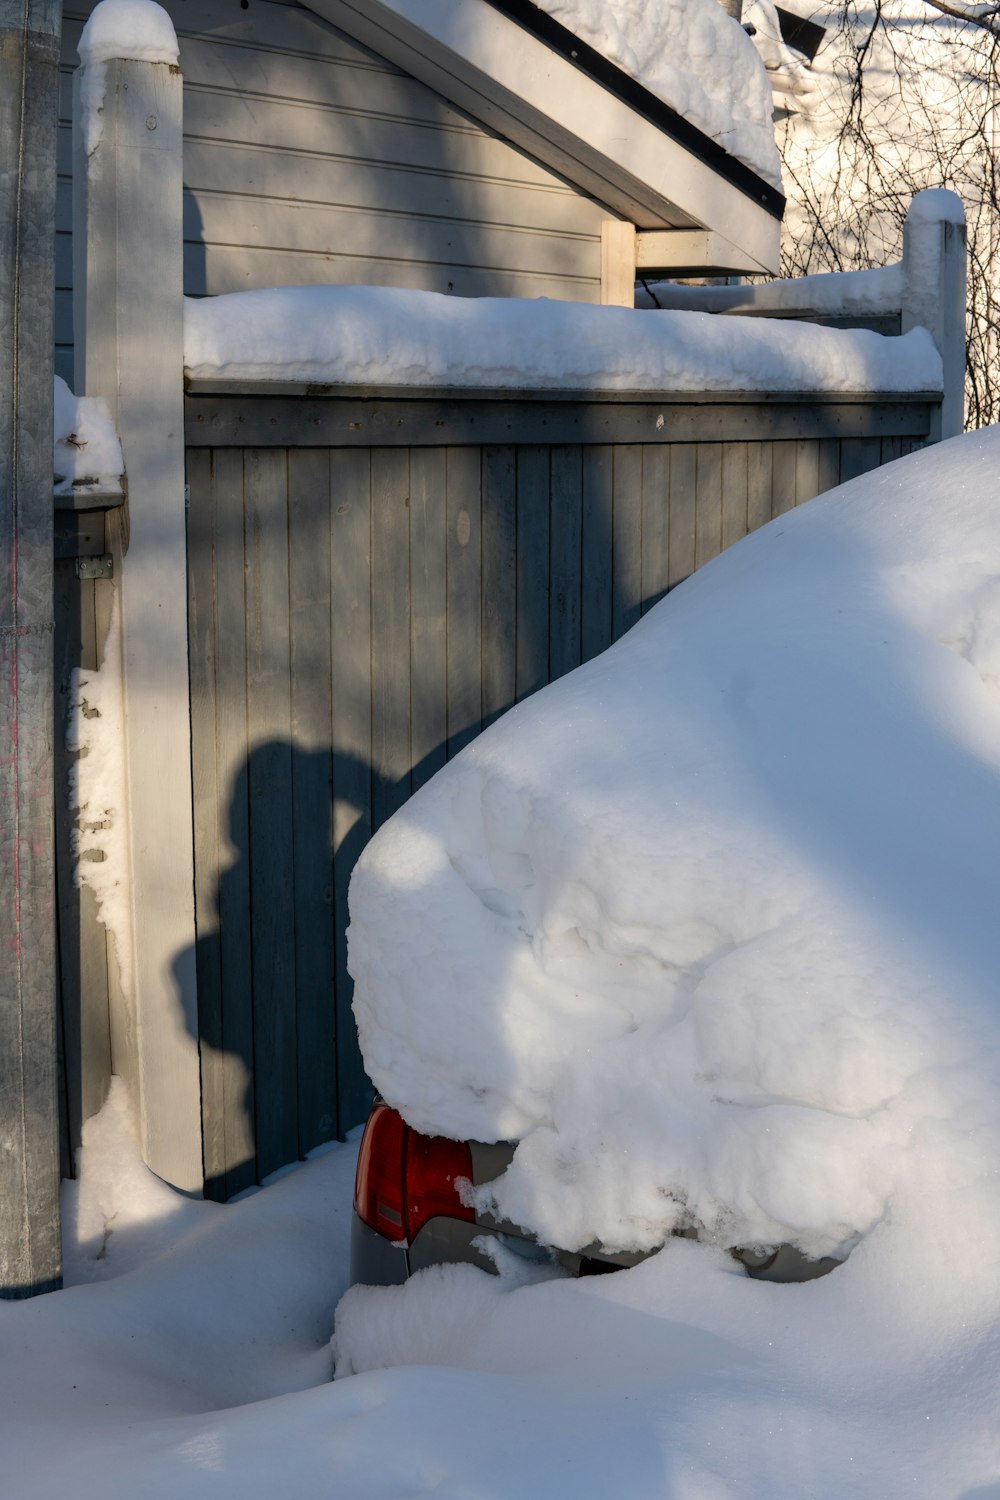 a red fire hydrant covered in snow next to a building